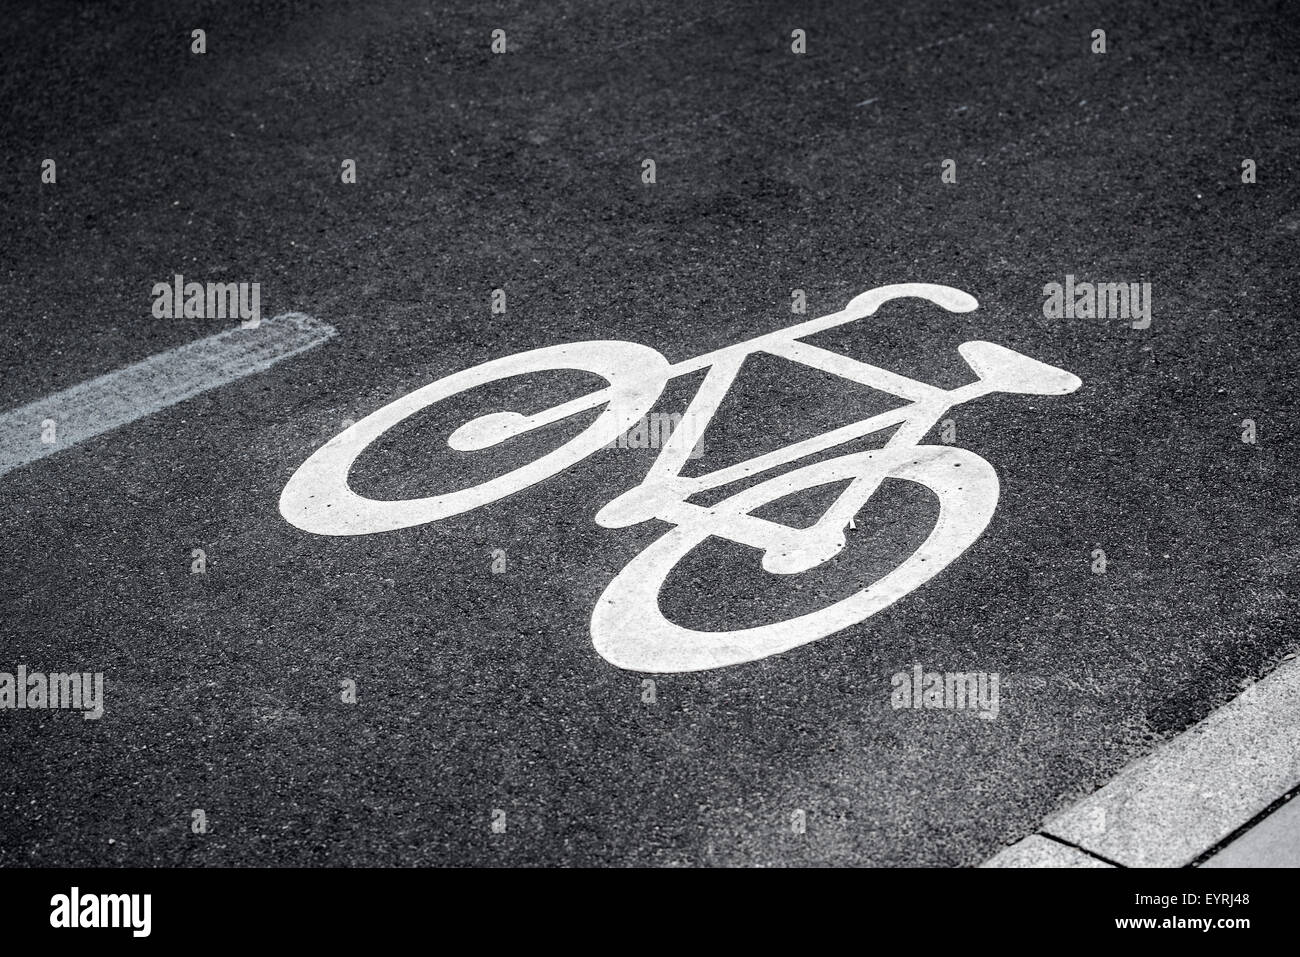 Bike Lane Sign on Asphalt Road Marking the Space for Cycling in Urban Outdoor Setting Stock Photo